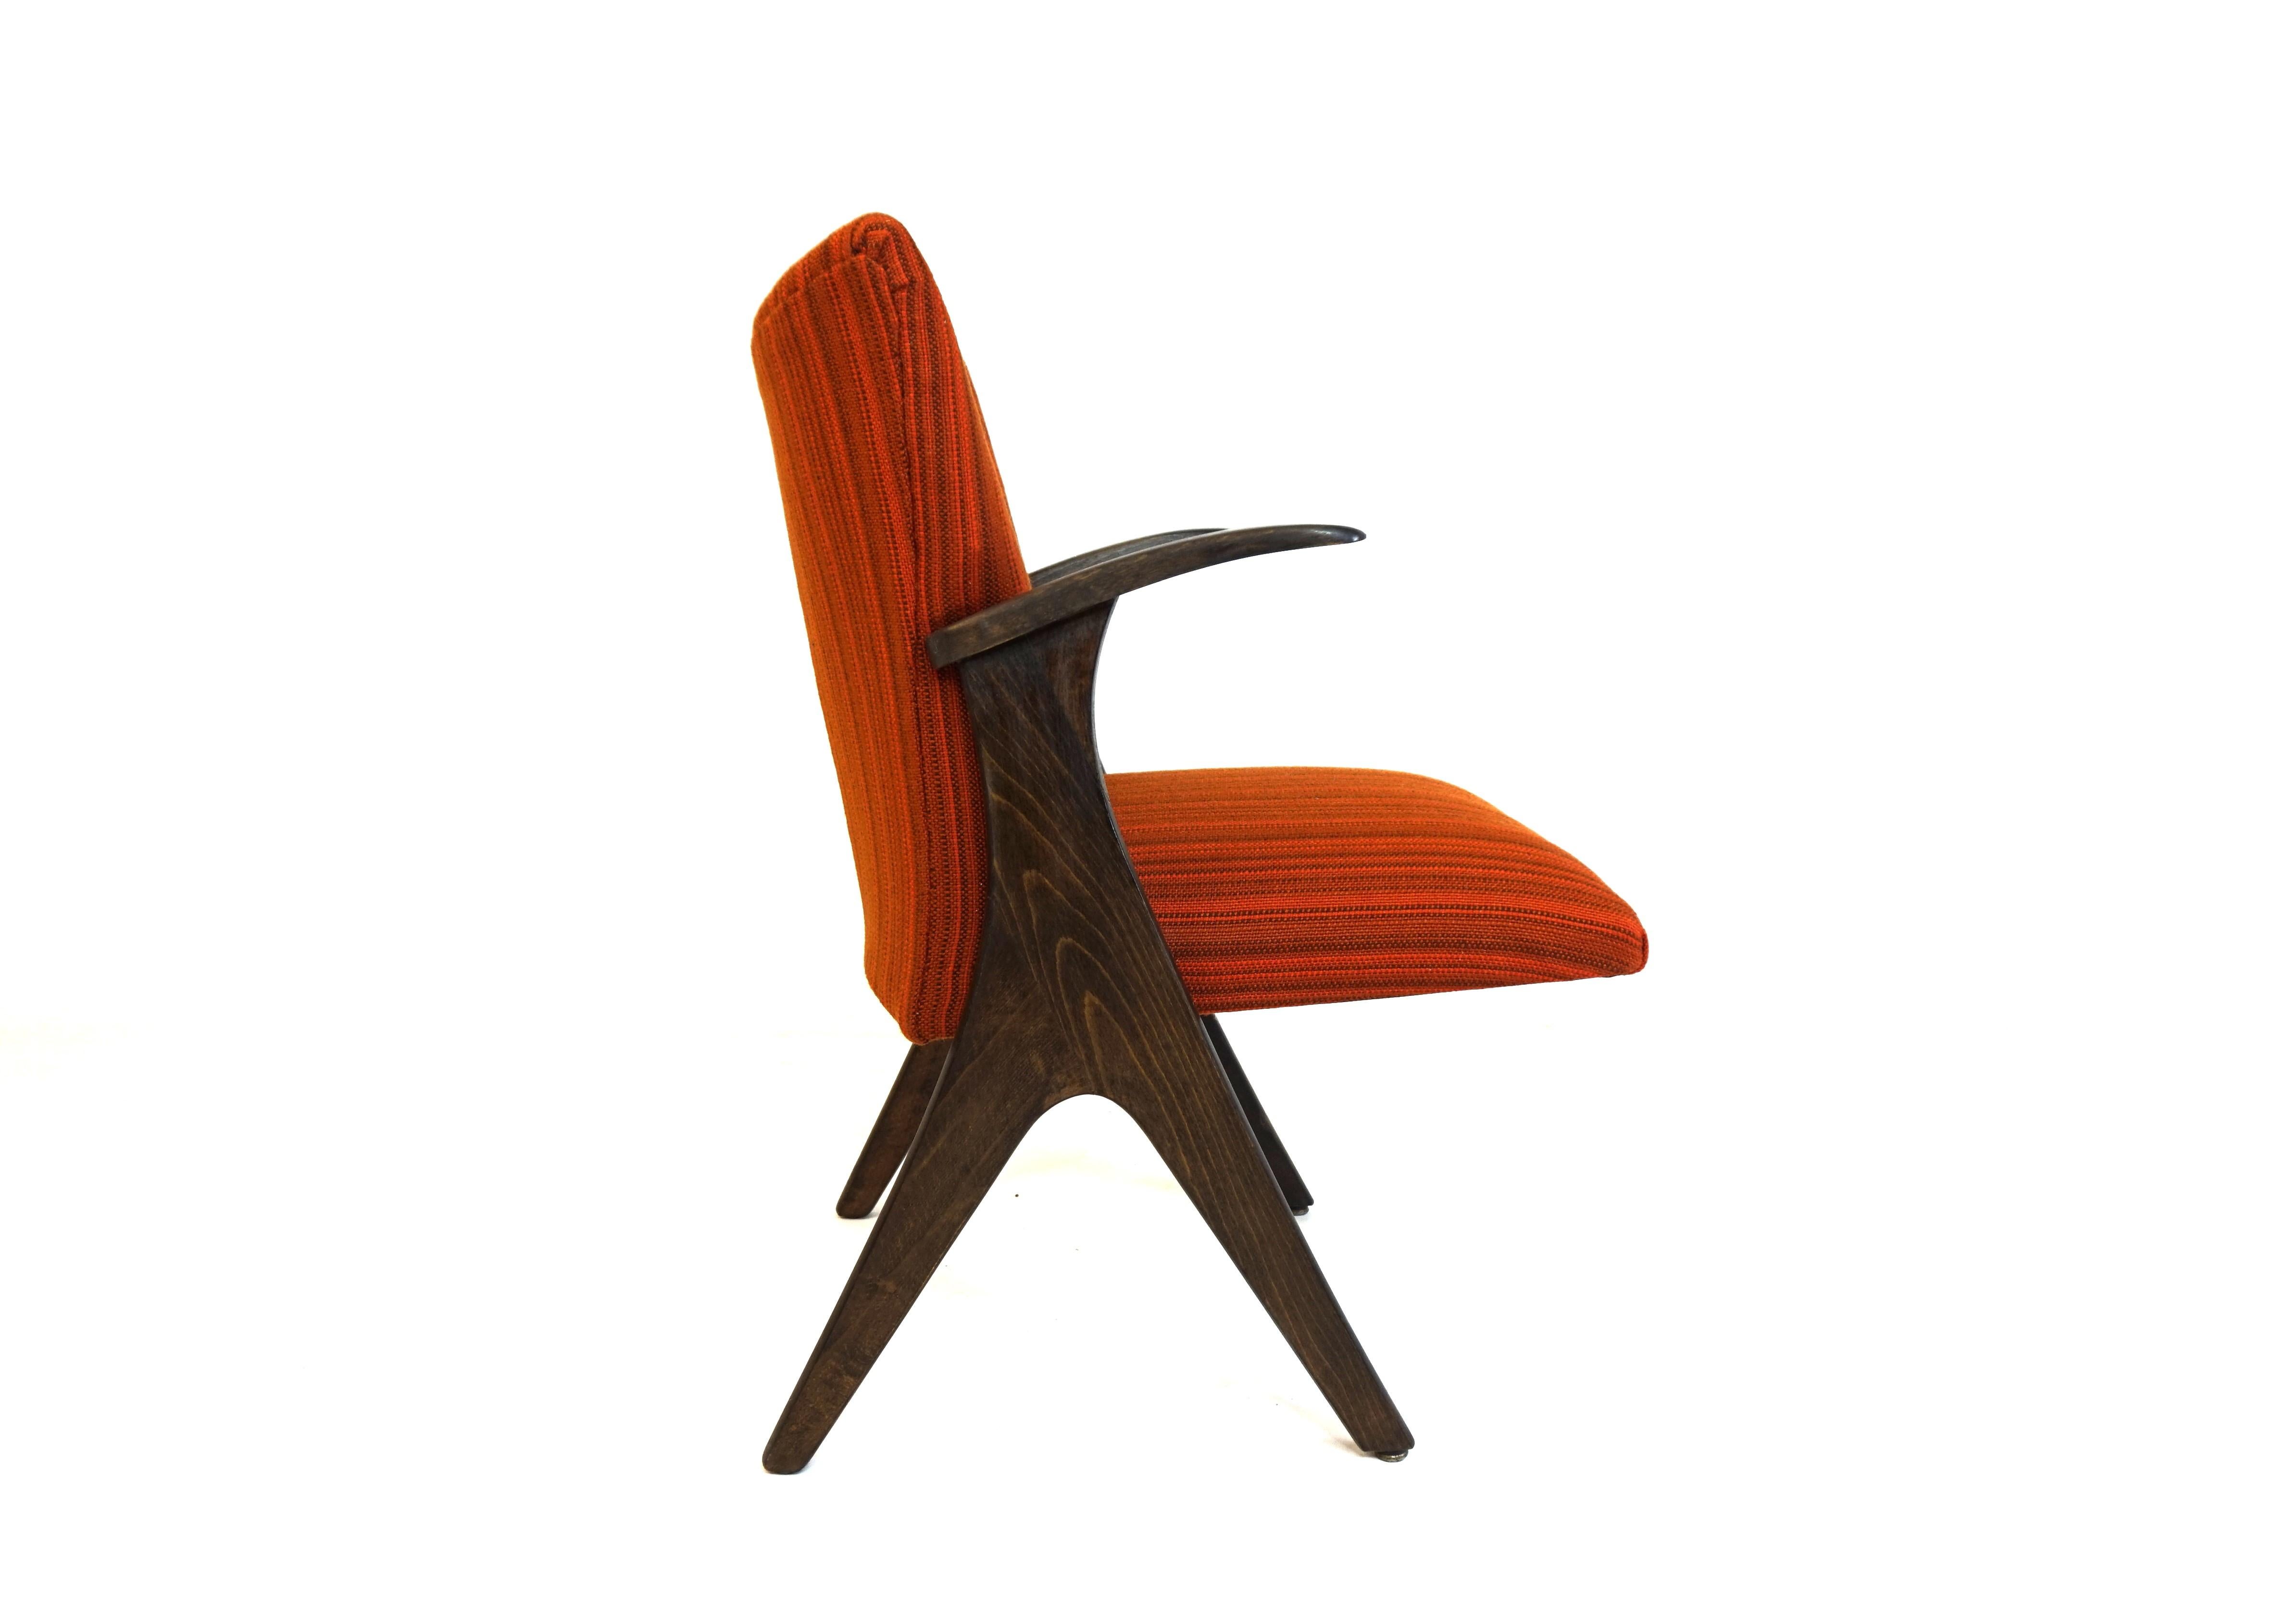 A penguin chair that comes in excellent condition with original fabric.  The dark brown beech wood frame is in very good condition. The orange-red cotton fabric shows hardly any signs of wear. The suspension of the seat is perfect. 

 

Carl Sasse